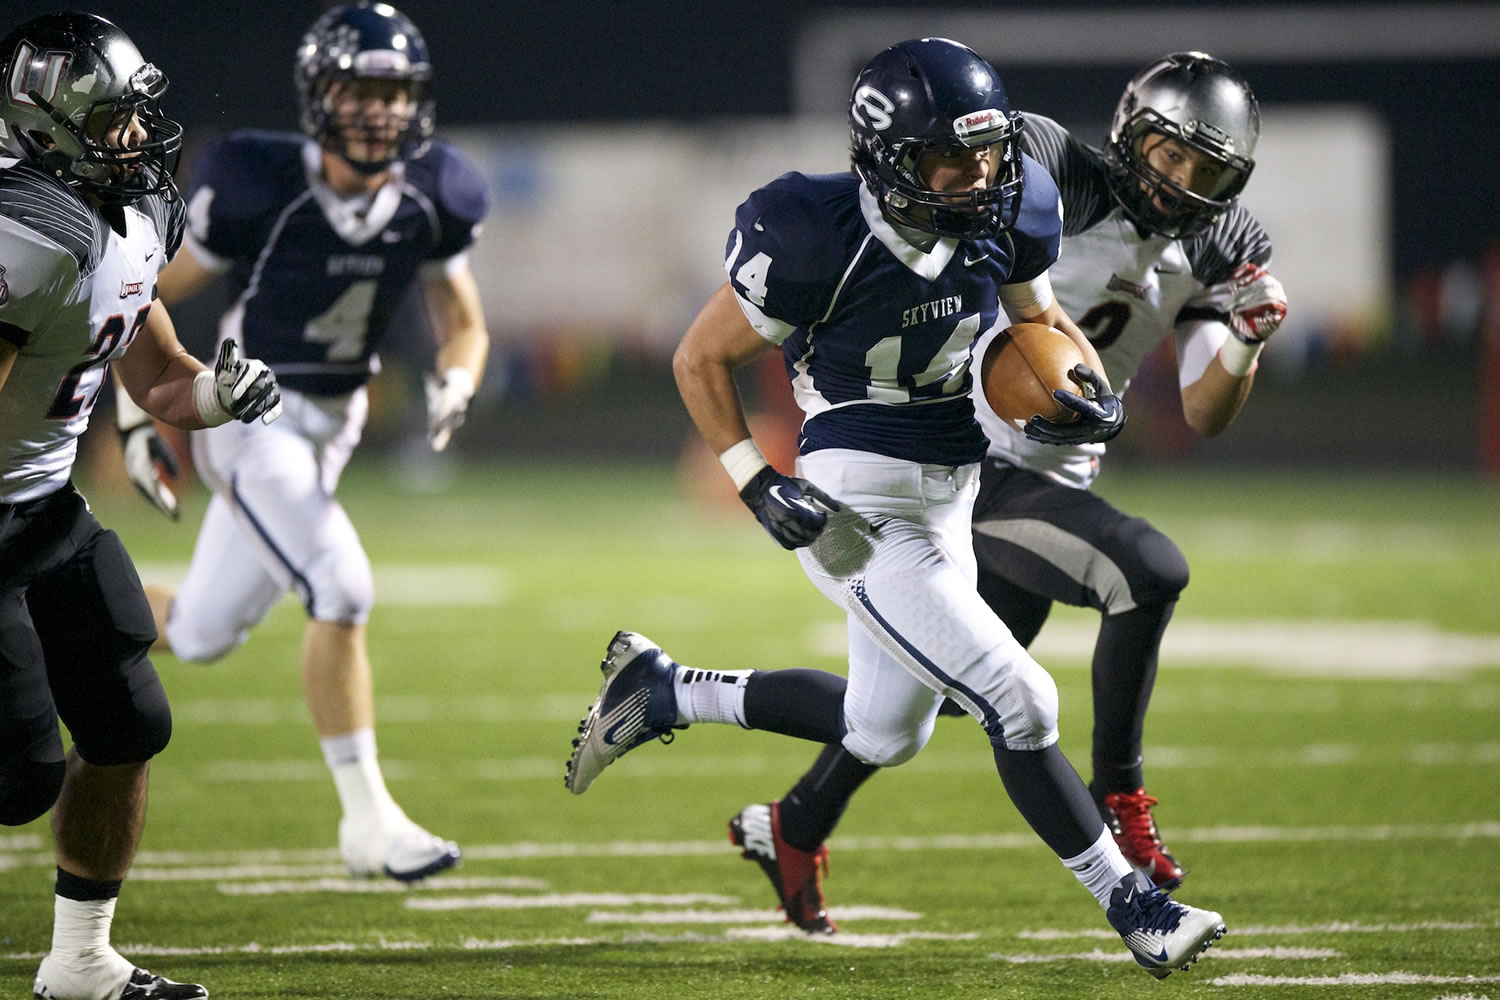 On a fourth and long Kyle Ponciano, 14, of Skyview High School breaks past Union High School defenders for a touchdown during a game at Kiggins Bowl Friday October 26, 2012 in Vancouver, Washington.